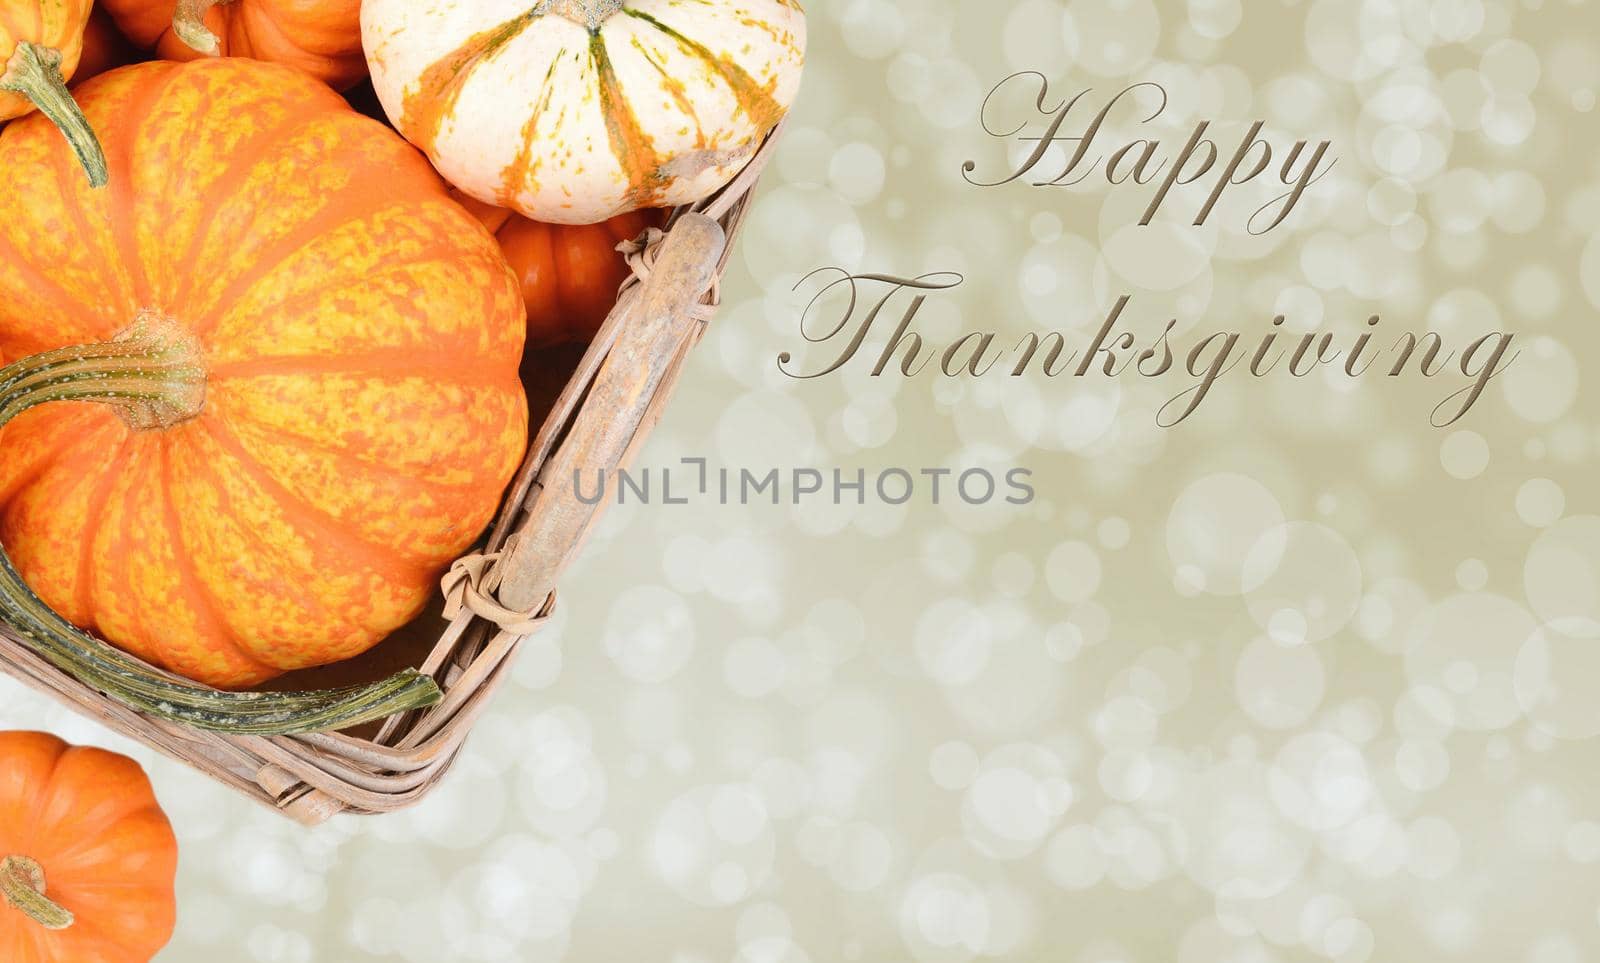 Basket of pumpkins and gourds on a warm bokeh background with the words Happy Thanksgiving. Room for additional copy.